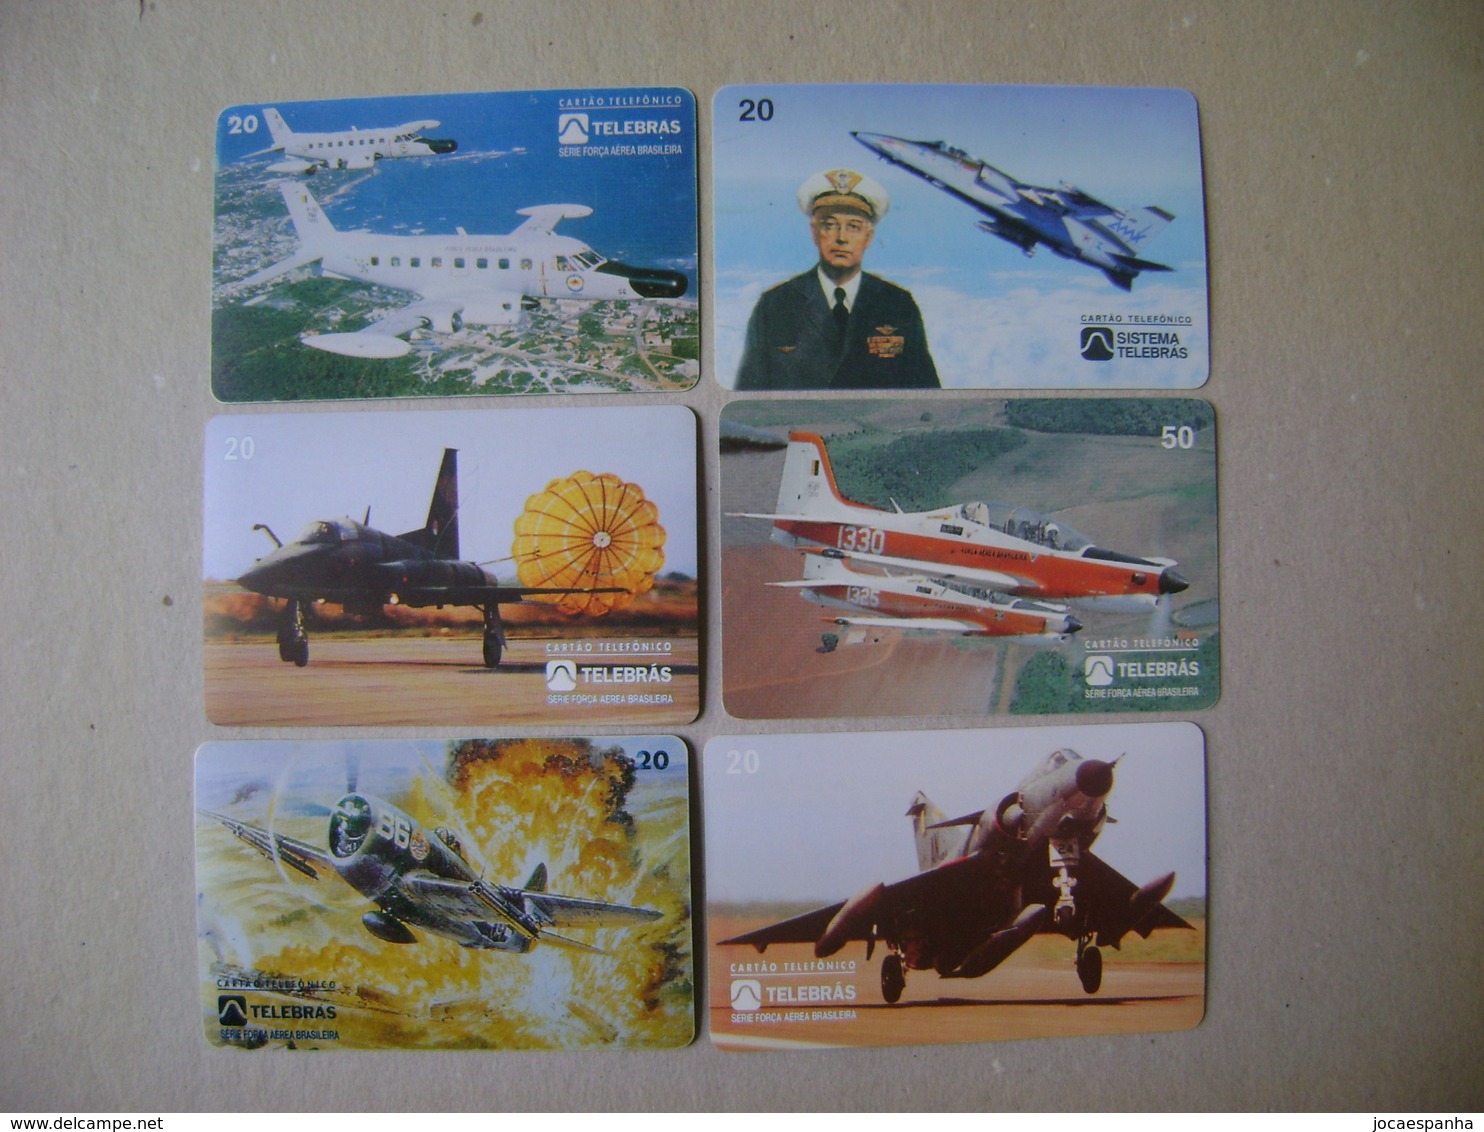 10 TELEPHONE CARDS OF AIRPLANE (BRAZIL) - Avions